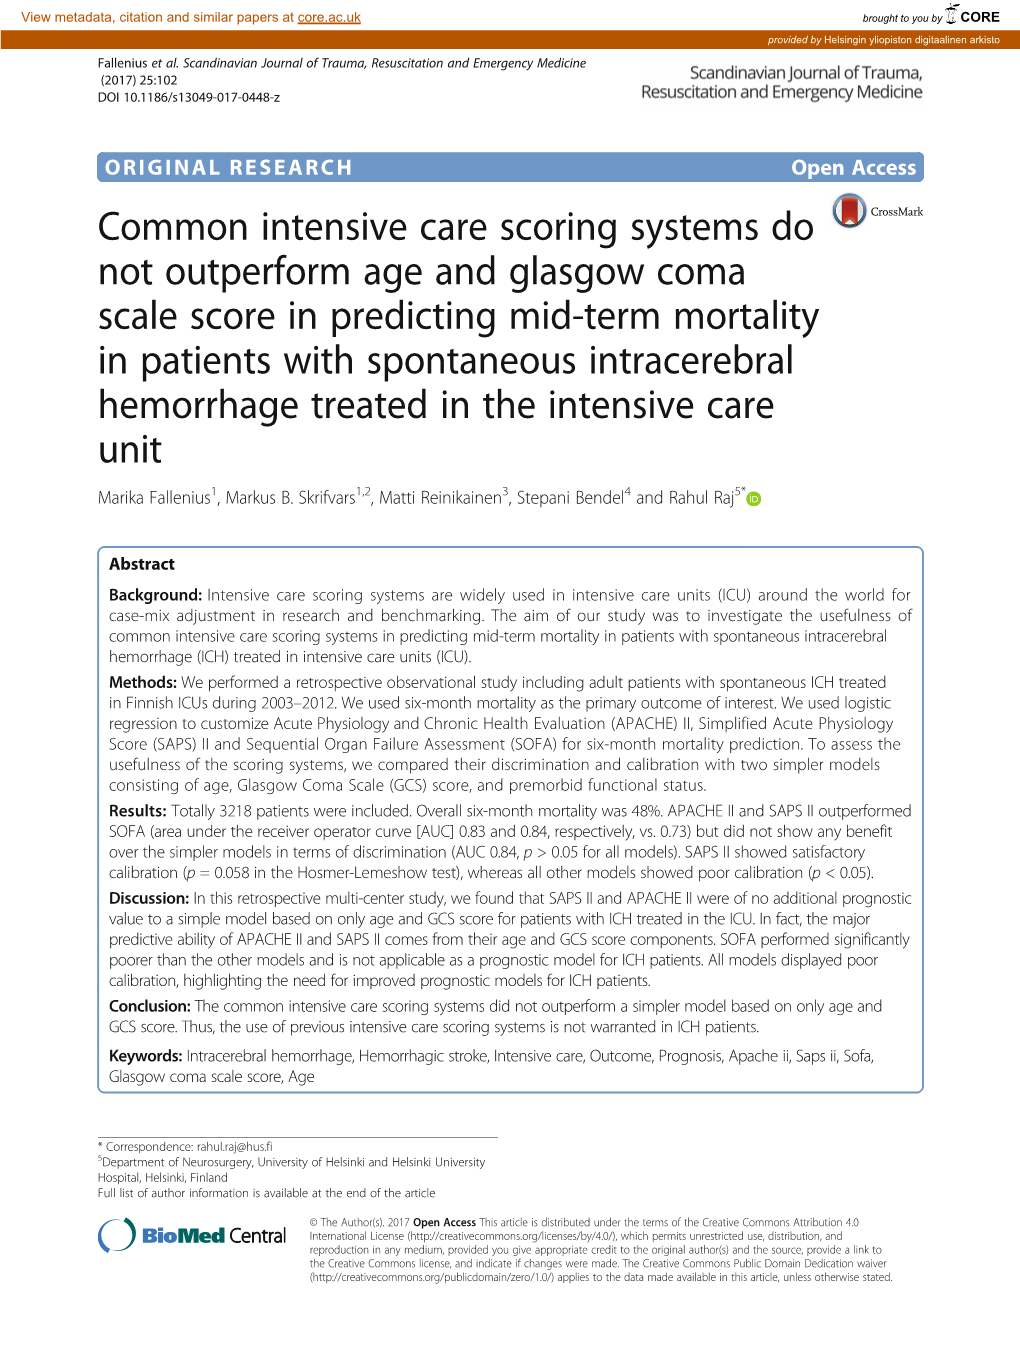 Common Intensive Care Scoring Systems Do